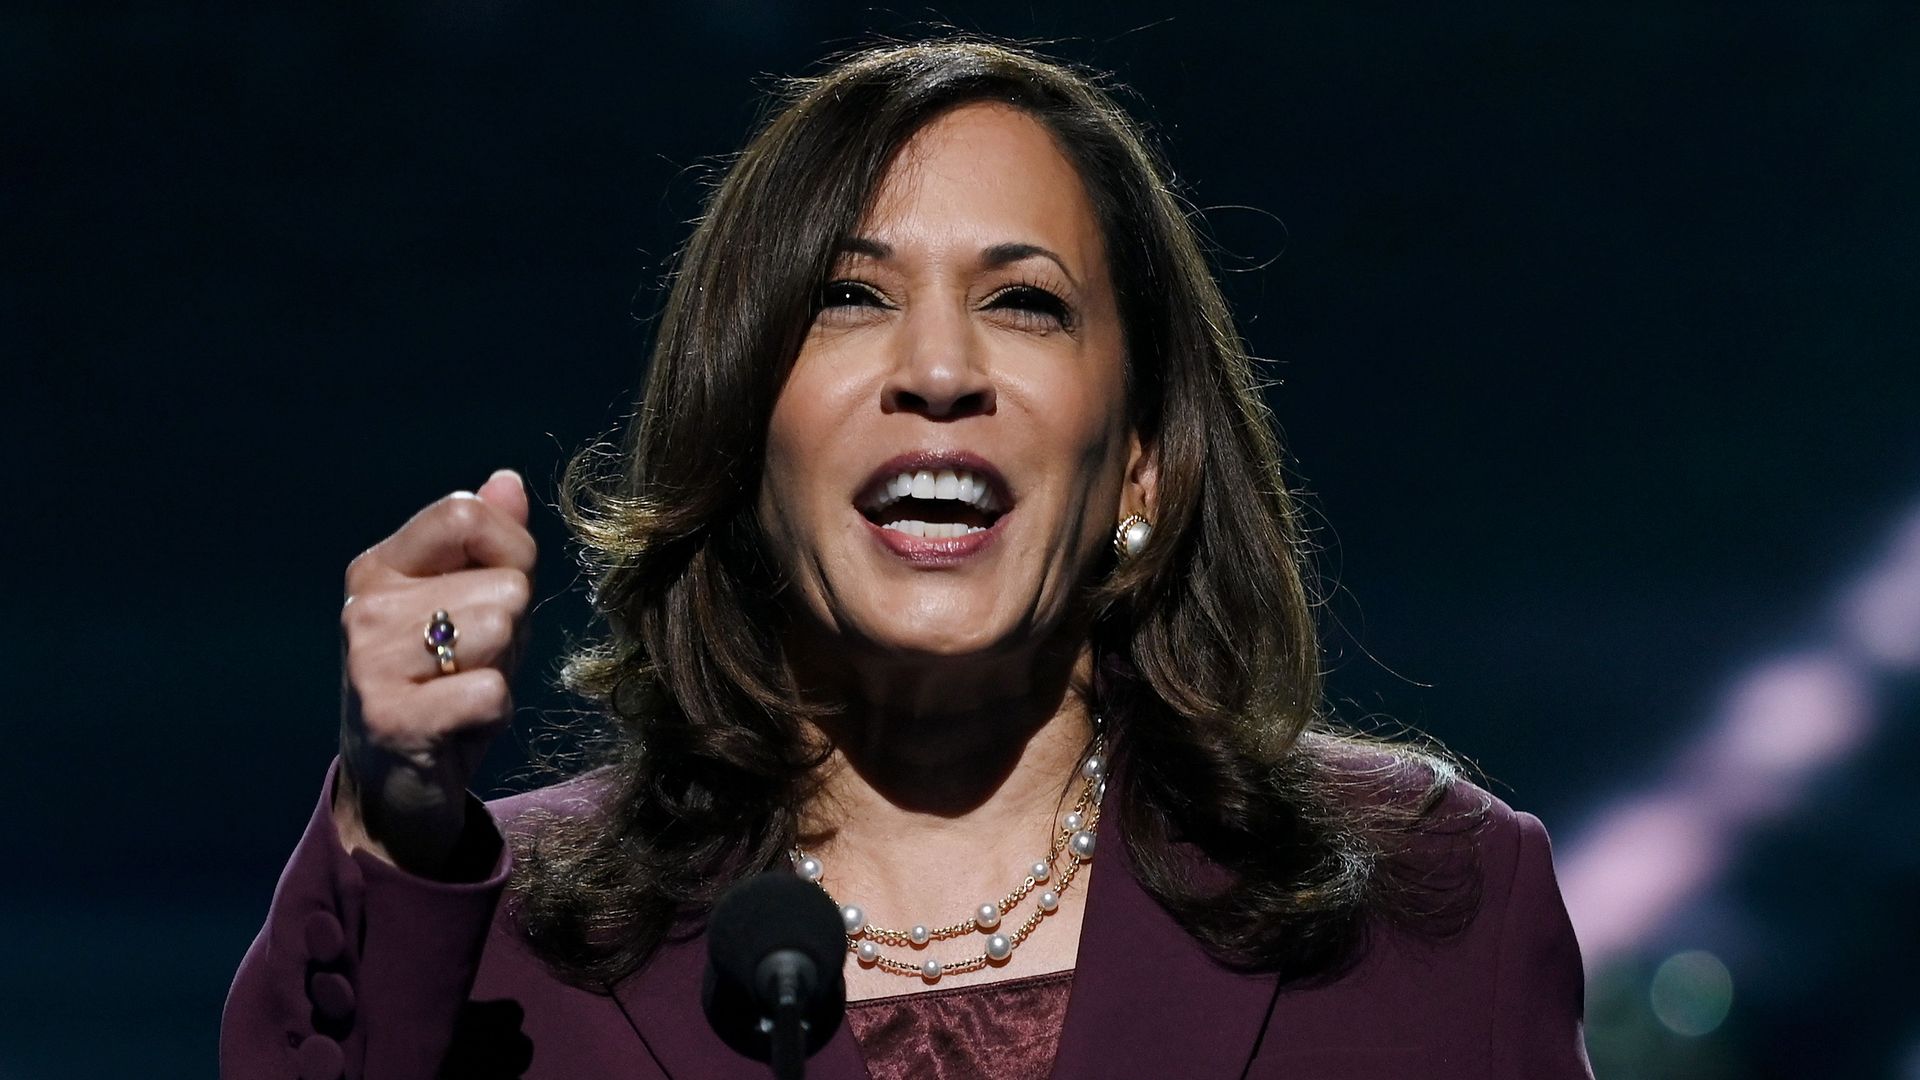  Kamala Harris speaks during the third day of the Democratic National Convention, being held virtually amid the novel coronavirus pandemic, at the Chase Center in Wilmington, Delaware on August 19